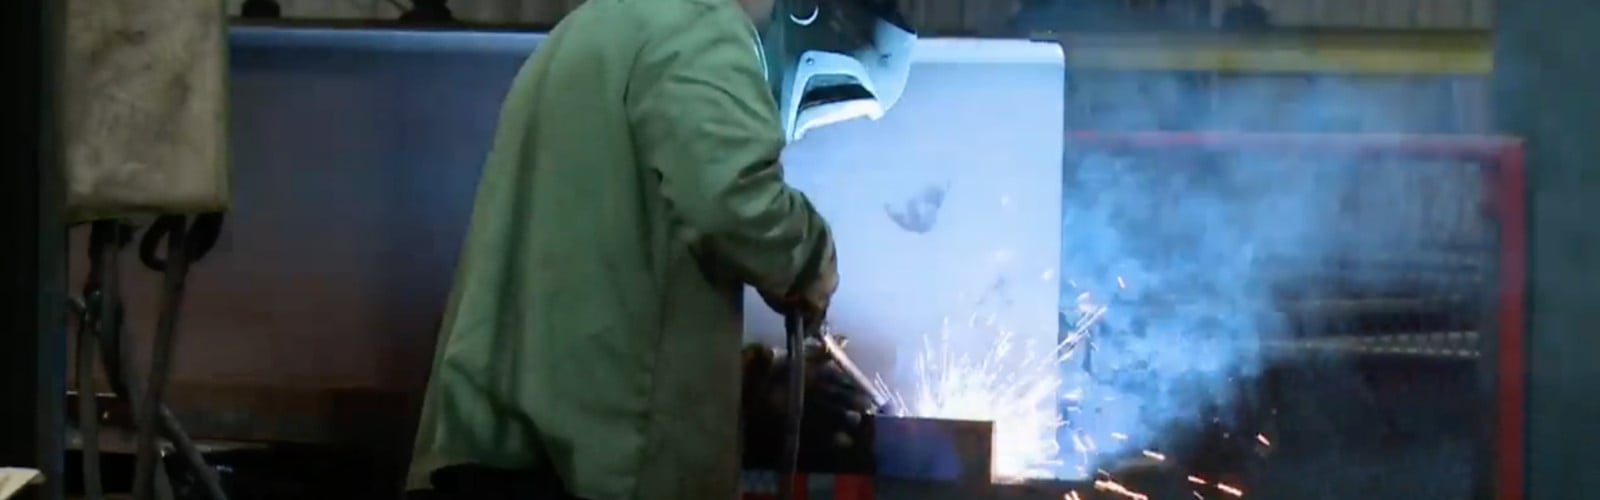 welding safety training for the employee.jpg